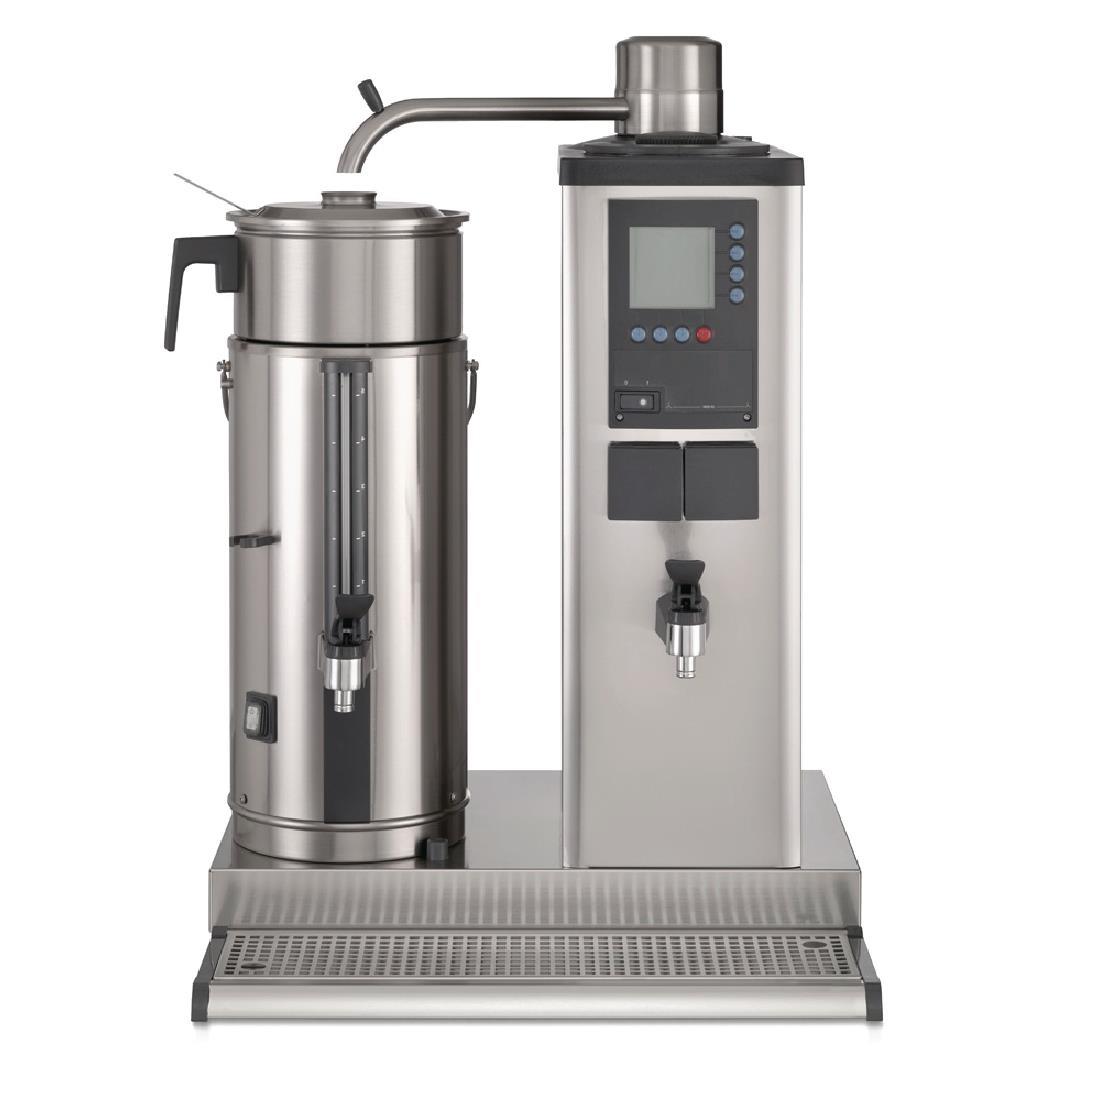 Bravilor B10 HWL Bulk Coffee Brewer with 10Ltr Coffee Urn and Hot Water Tap 3 Phase - DC688  - 2